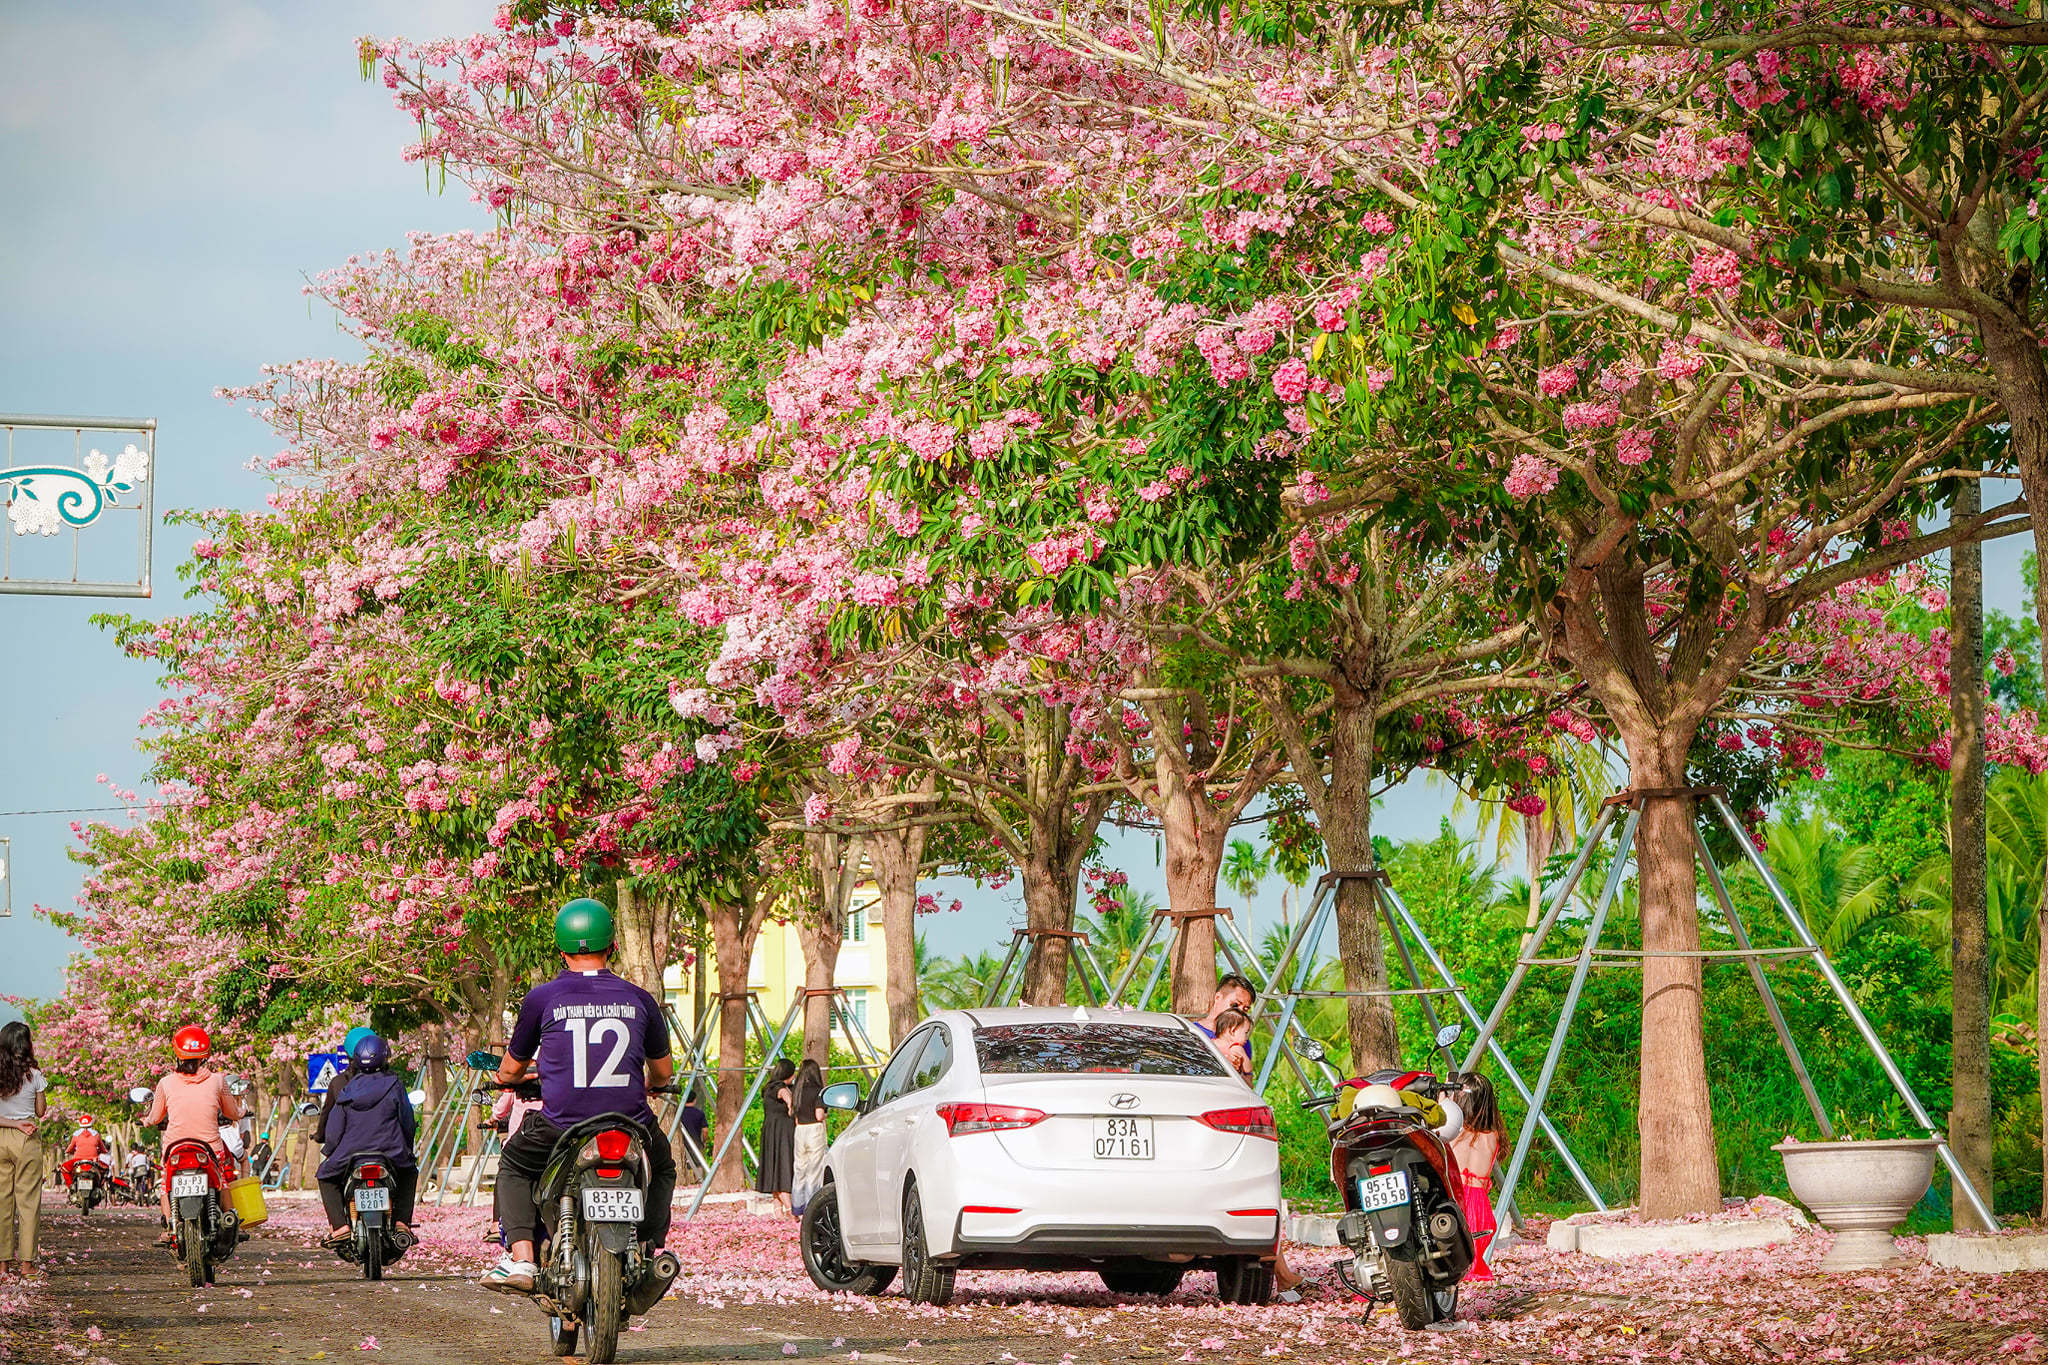 The most beautiful pink lily street in the West attracts young people